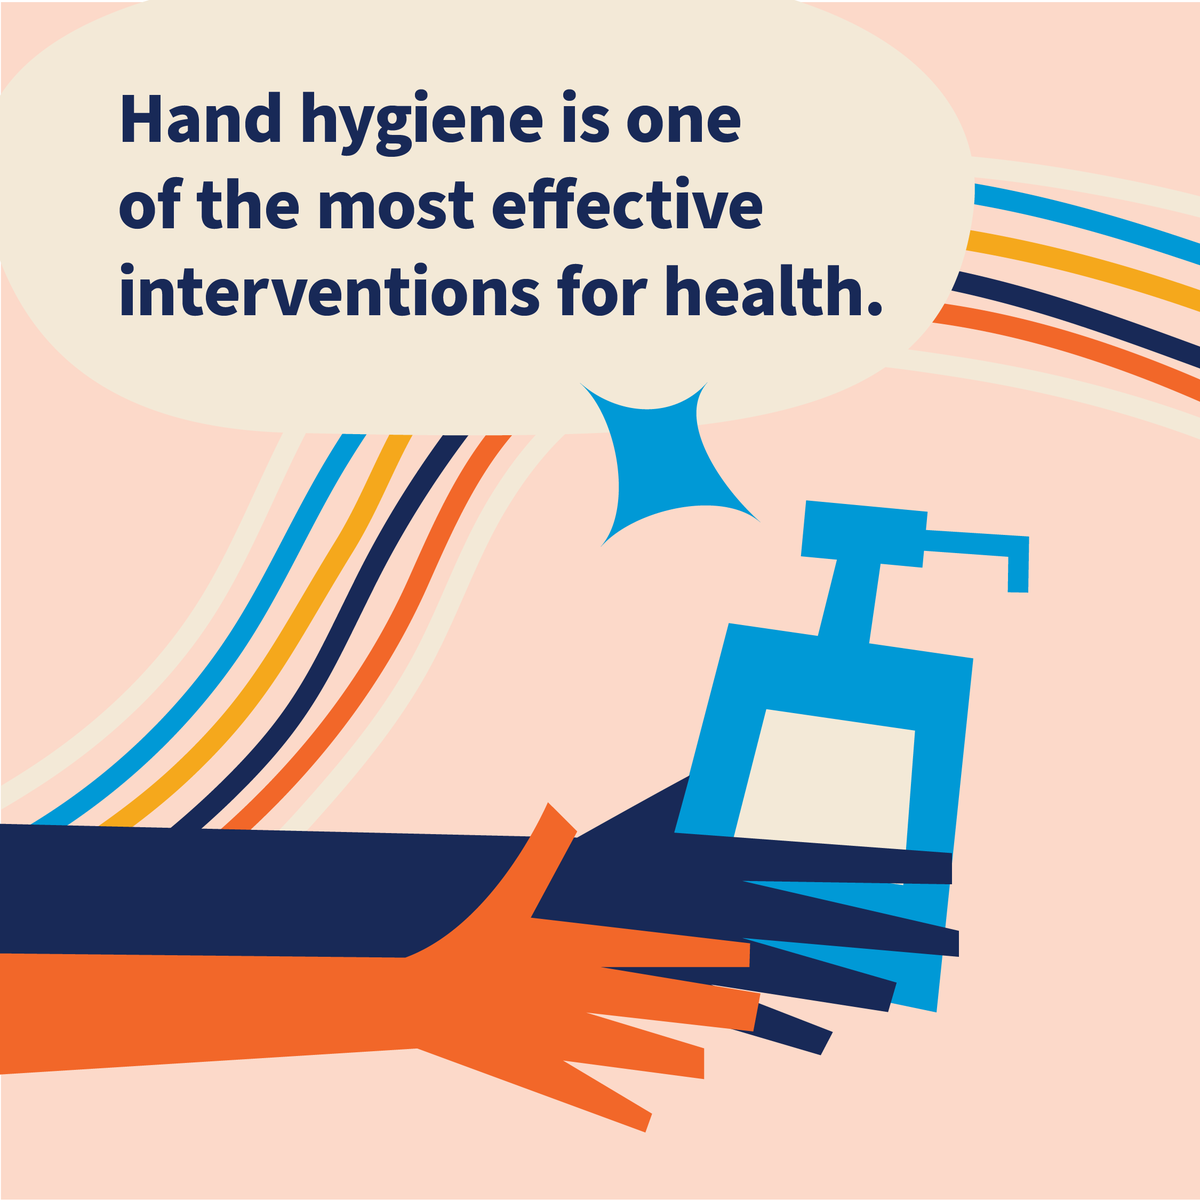 World Hand Hygiene Day is coming soon – Sunday 5th of May! #Worldhandhygieneday #Carehomecollaborative Here is another reason that sharing knowledge about hand hygiene is so important #knowledgemotivatesaction #ARHAI #NIPCM #WHO